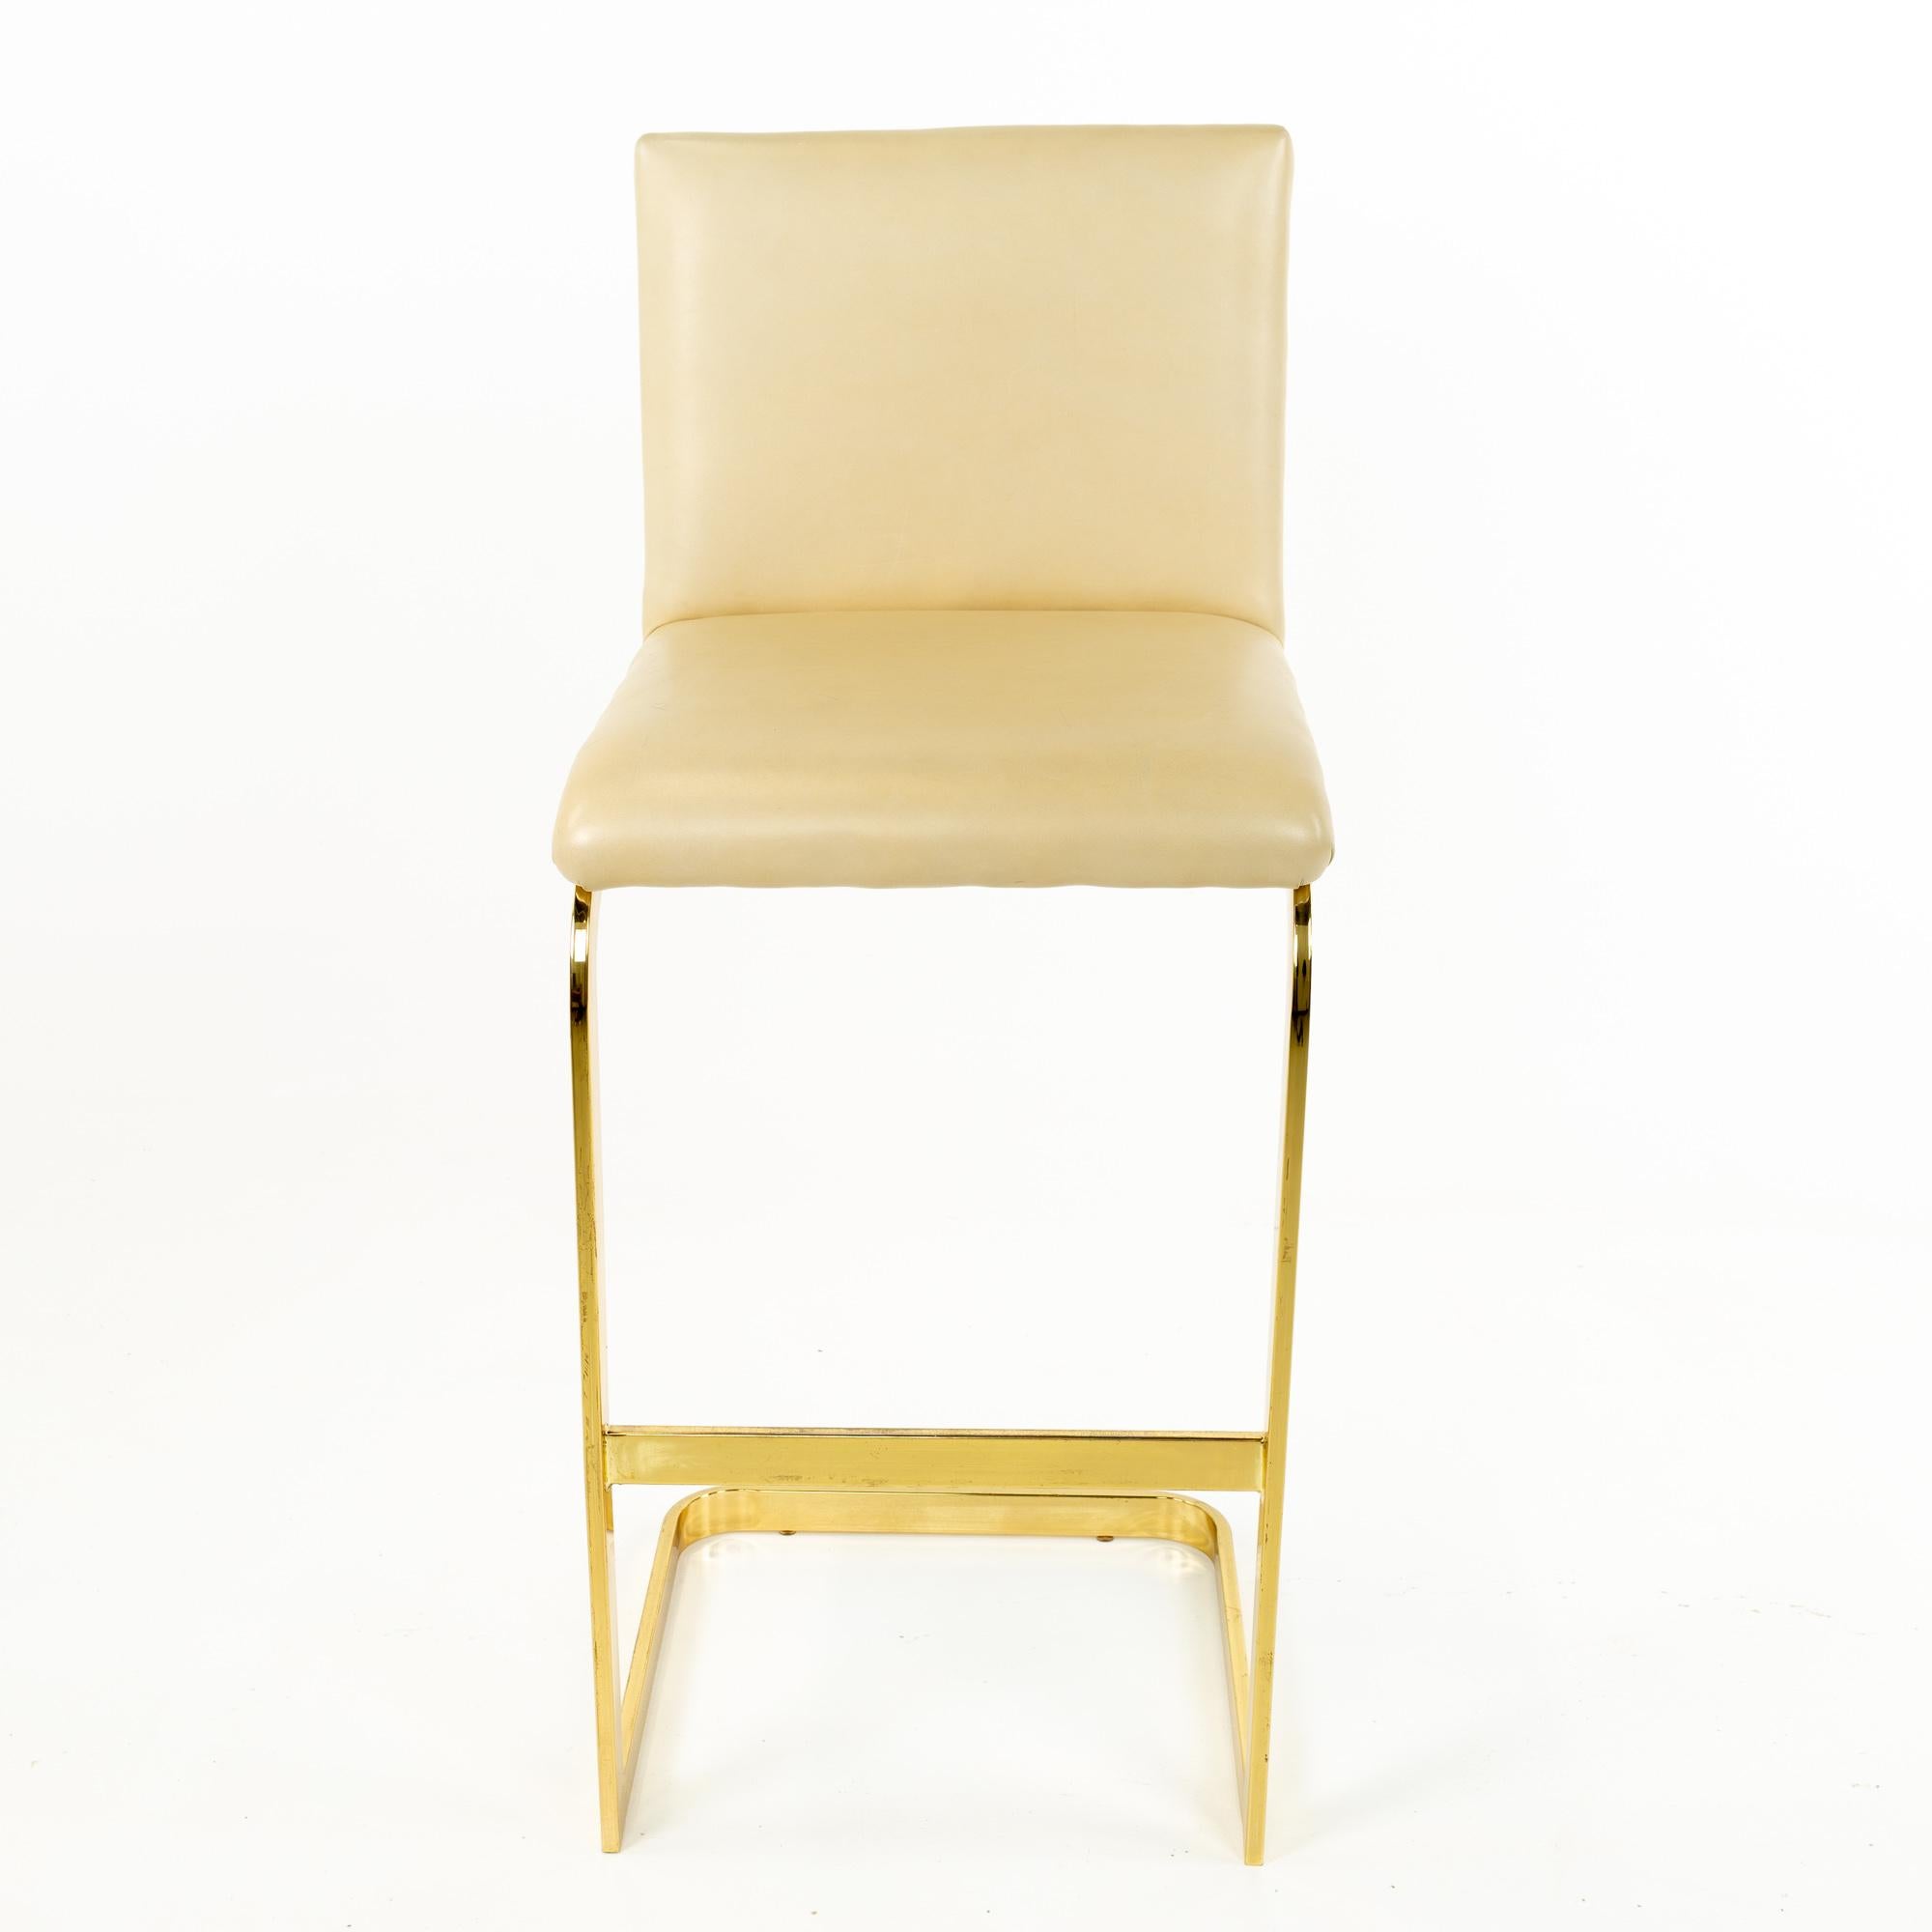 Late 20th Century Milo Baughman Style Mid Century Brass and Cream Upholstered Cantilever Bar Stool